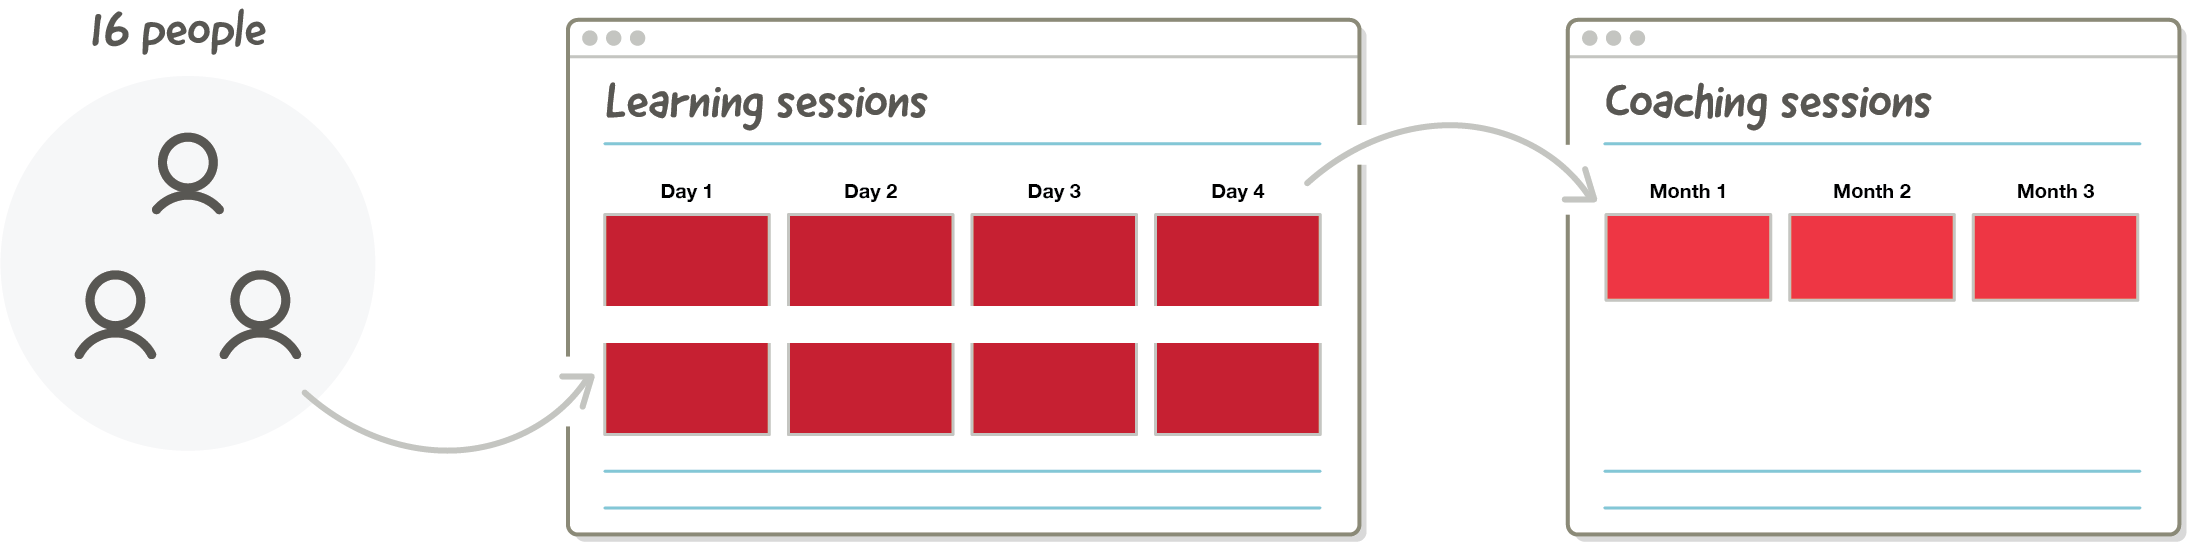 A sketch showing that the schedule is made up of 16 people, learning sessions on 4 consecutive days, and coaching sessions on three consecutive months